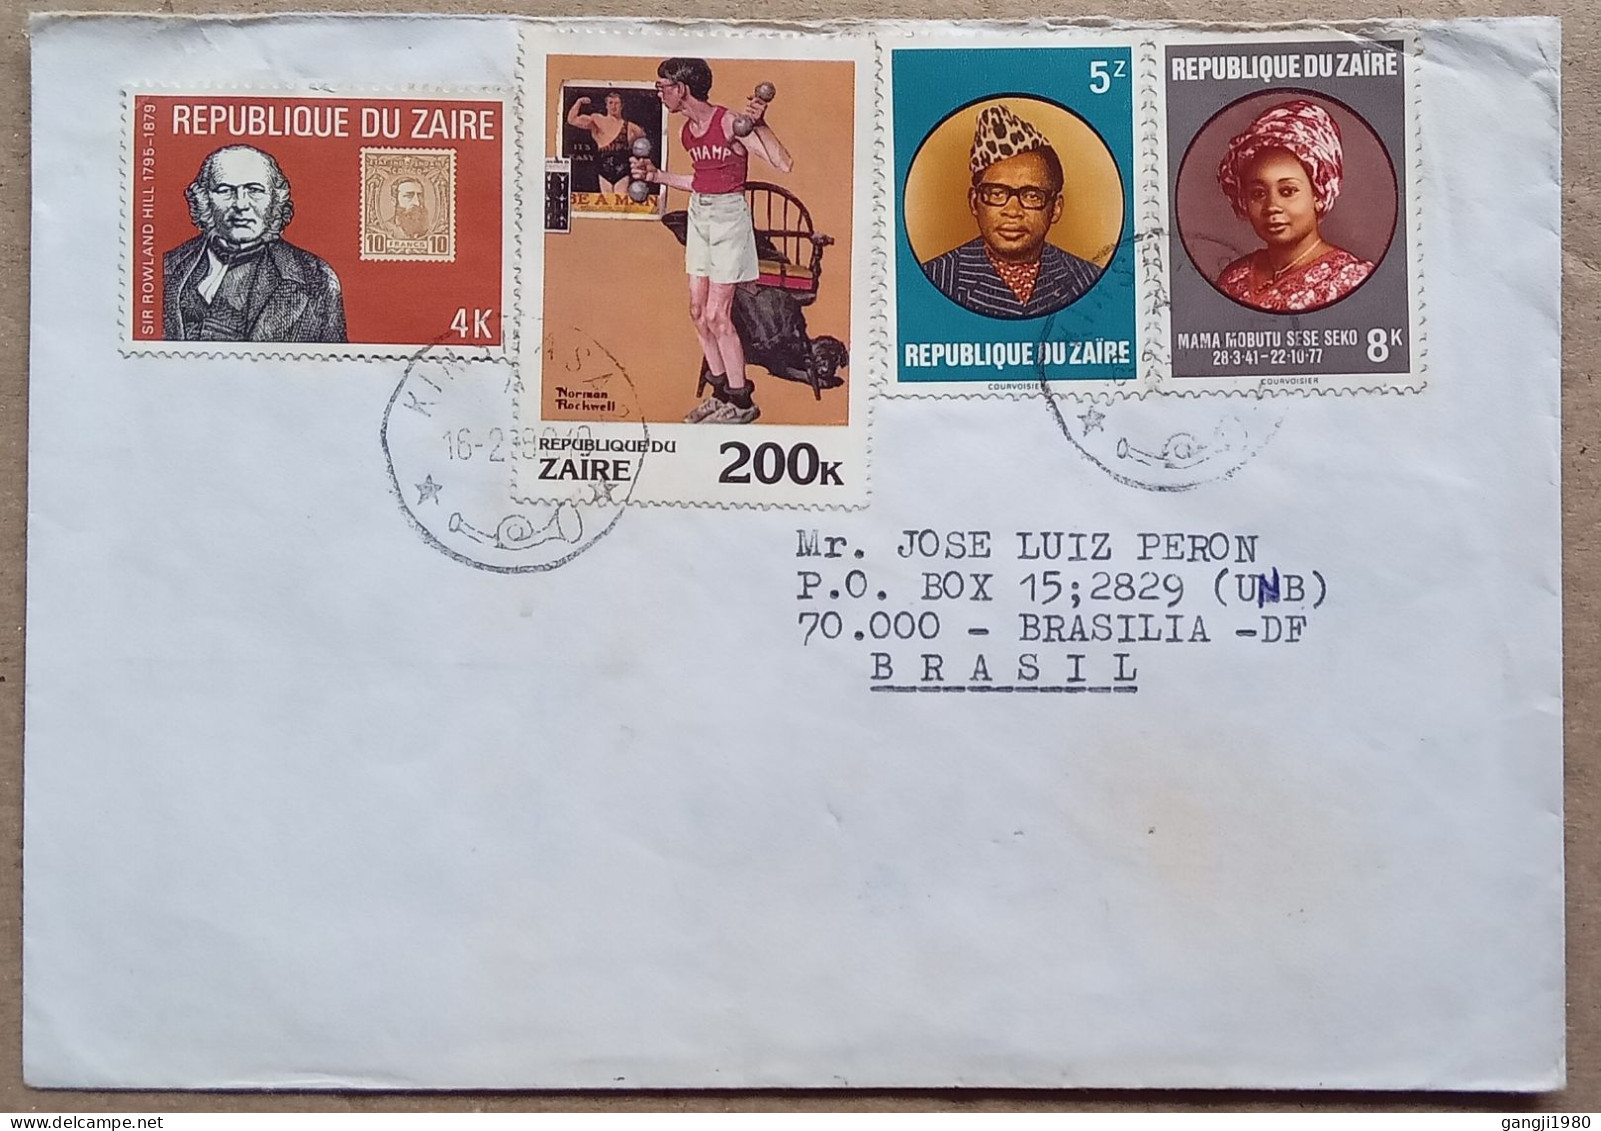 ZAIRE 1980, COVER USED TO BRAZIL, 6 STAMP, ROWLAND HILL, STAMP ON STAMP, PRESIDENT MOBUTU, MAMA MOBUTU, EXERCISING, KINA - Covers & Documents